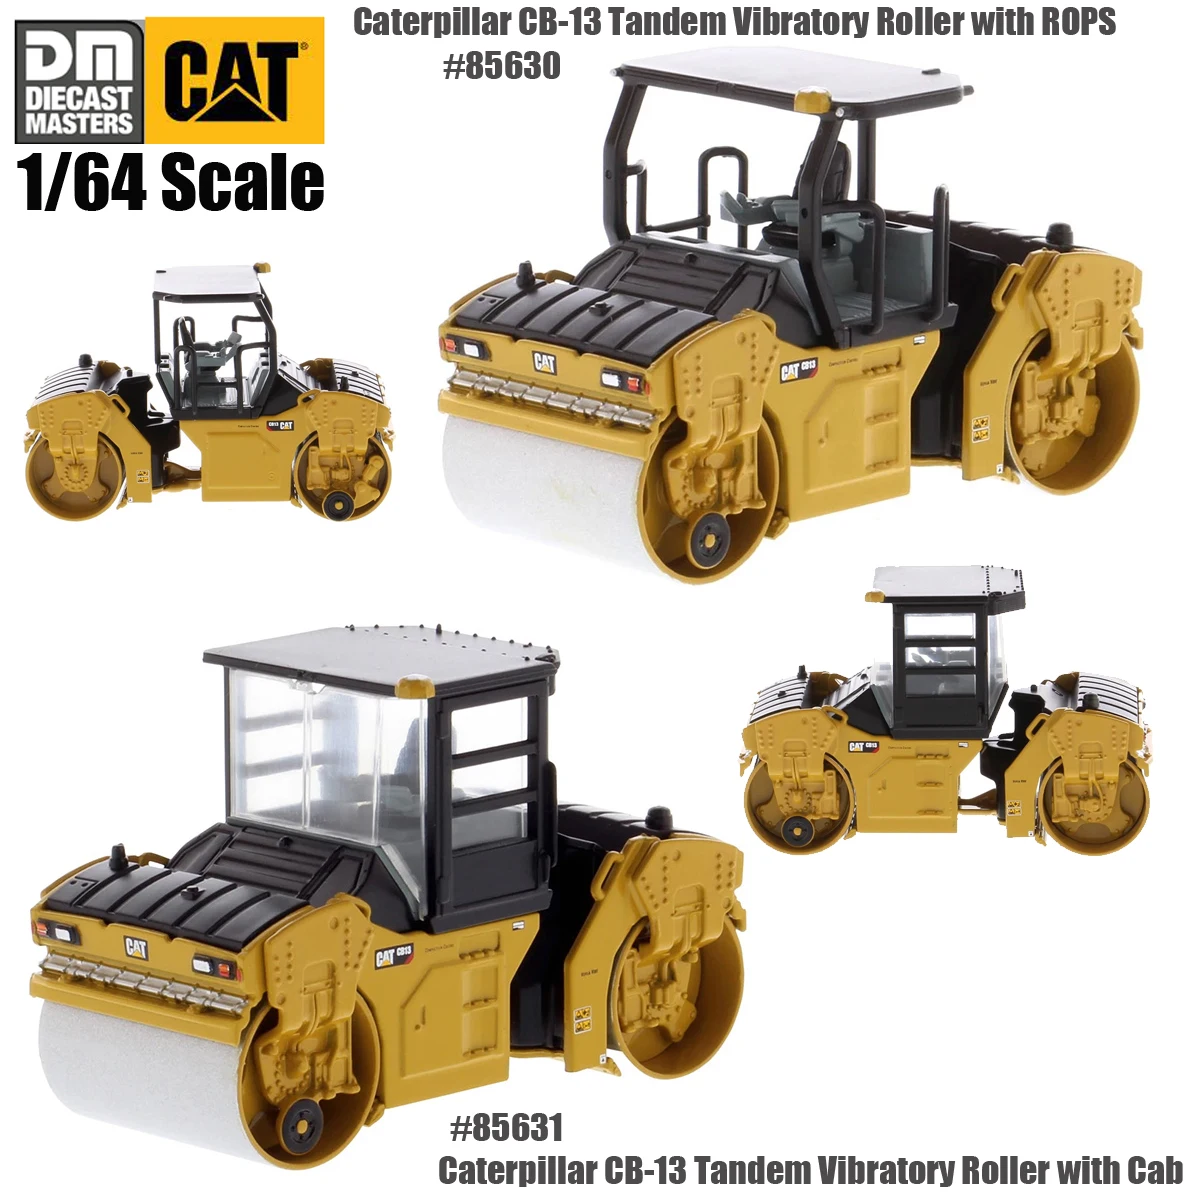 

DM Caterrpillar 1/64 Scale Cat CB-13 Tandem Vibratory Roller with ROPS or Cab Diecast Model for collection gift